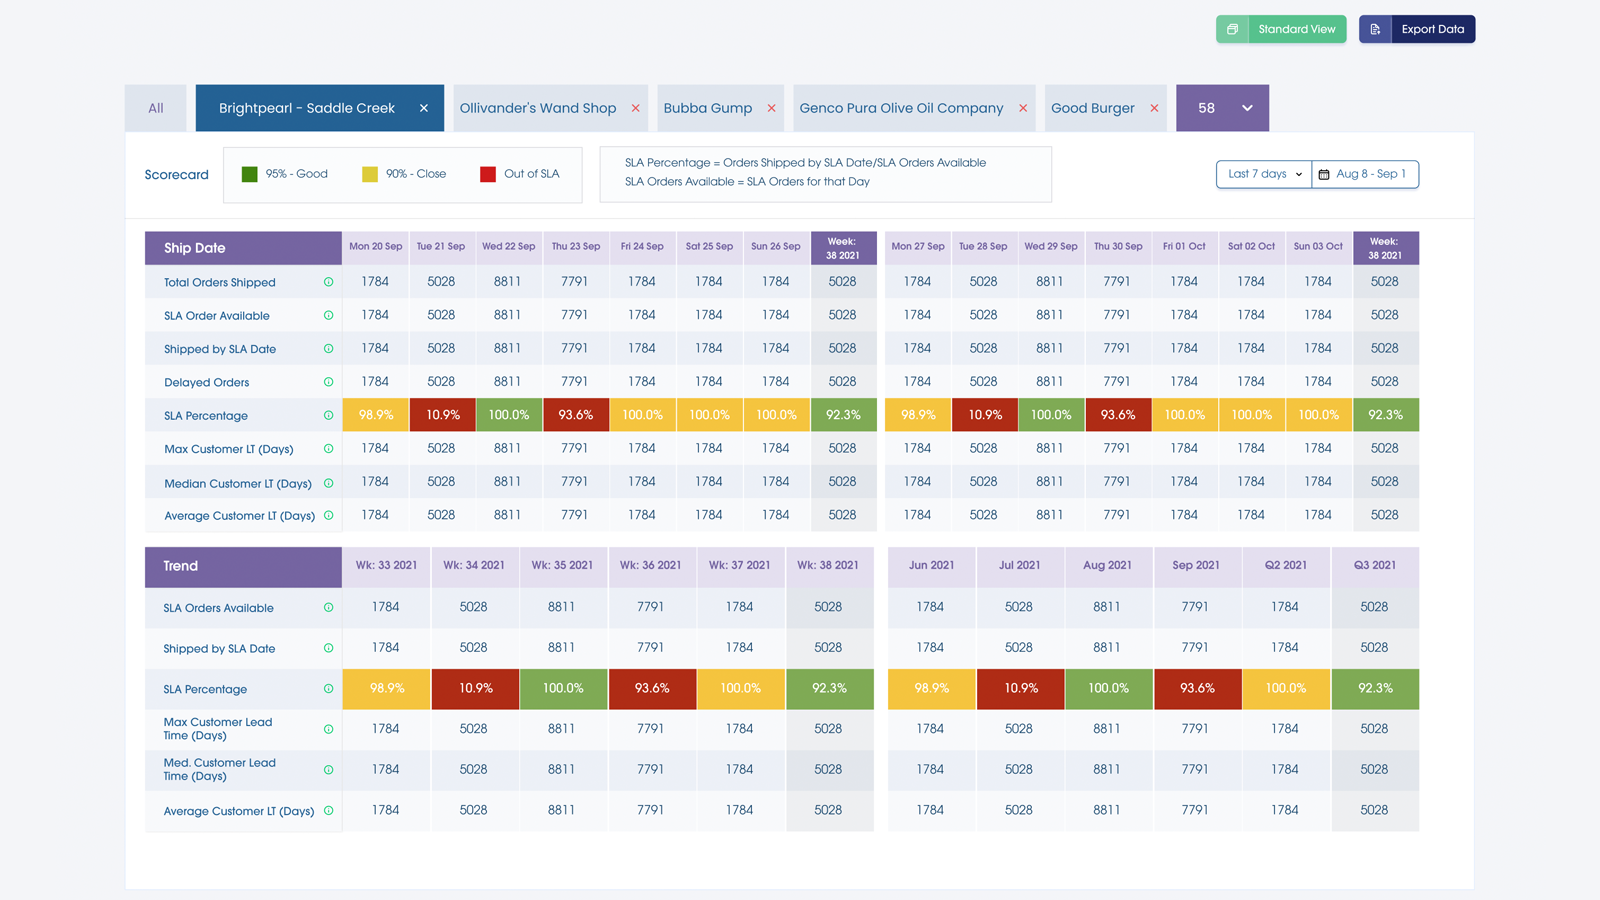 Monitor KPIs like on-time fulfillment, order accuracy and more